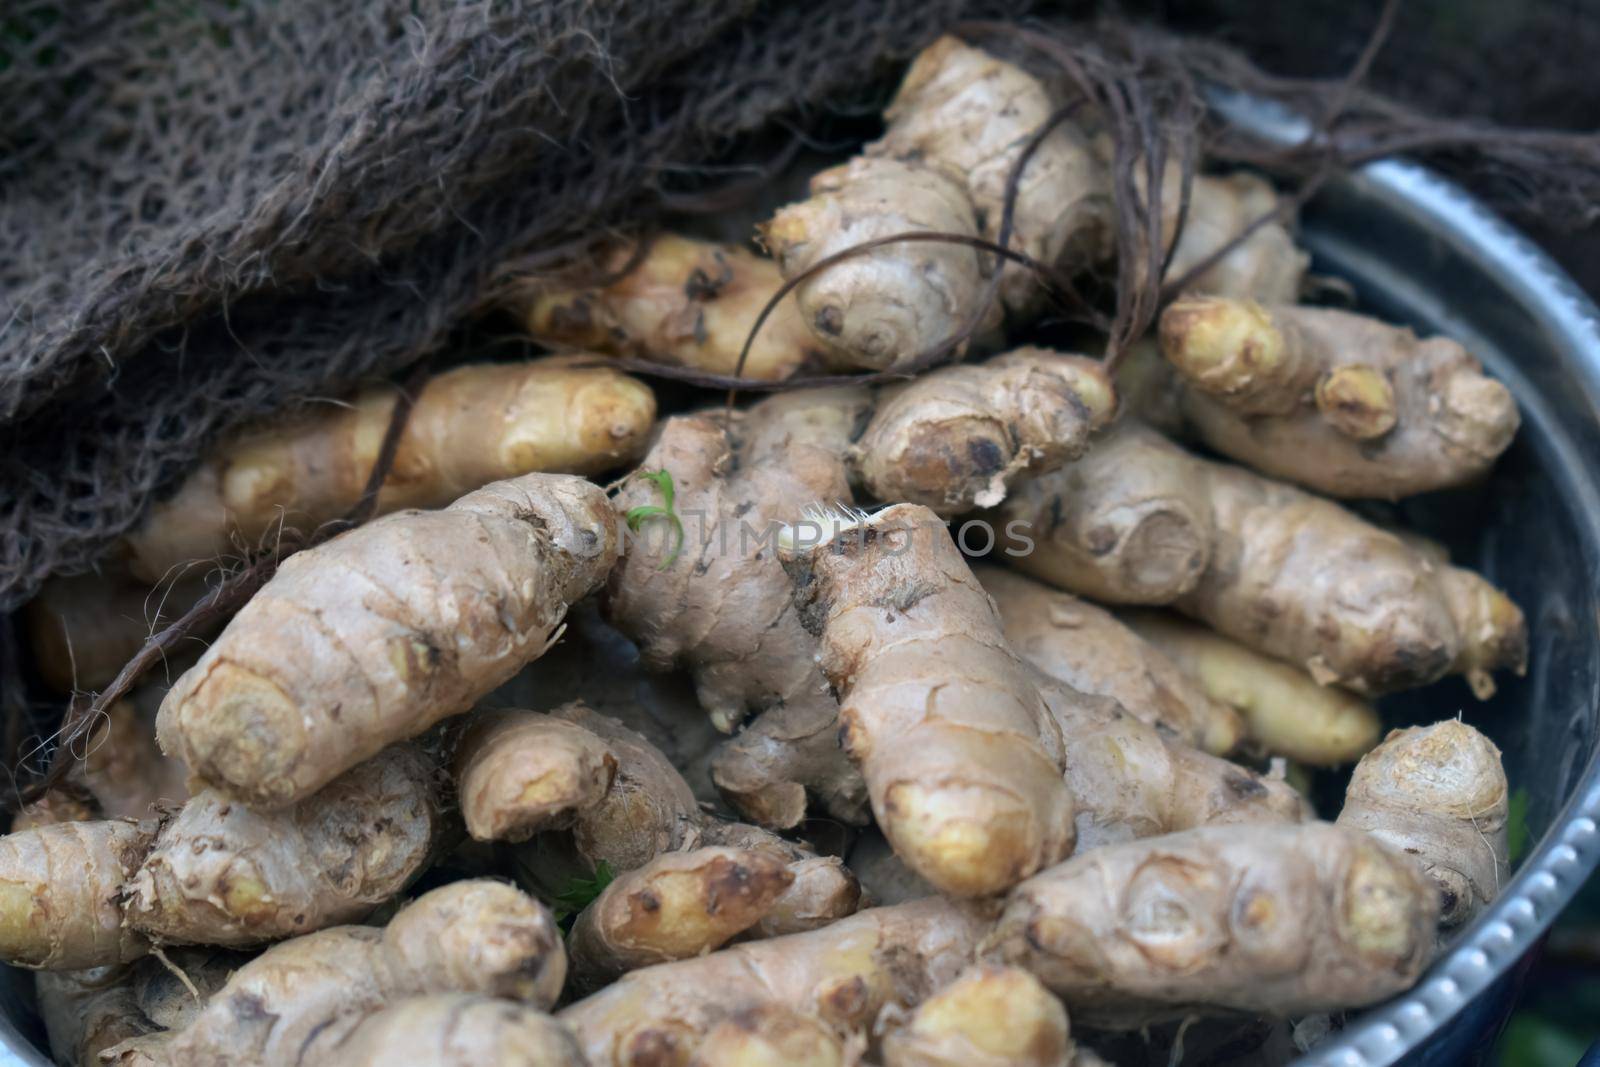 Closeup shot of a pile of fresh ginger in a market place by tabishere